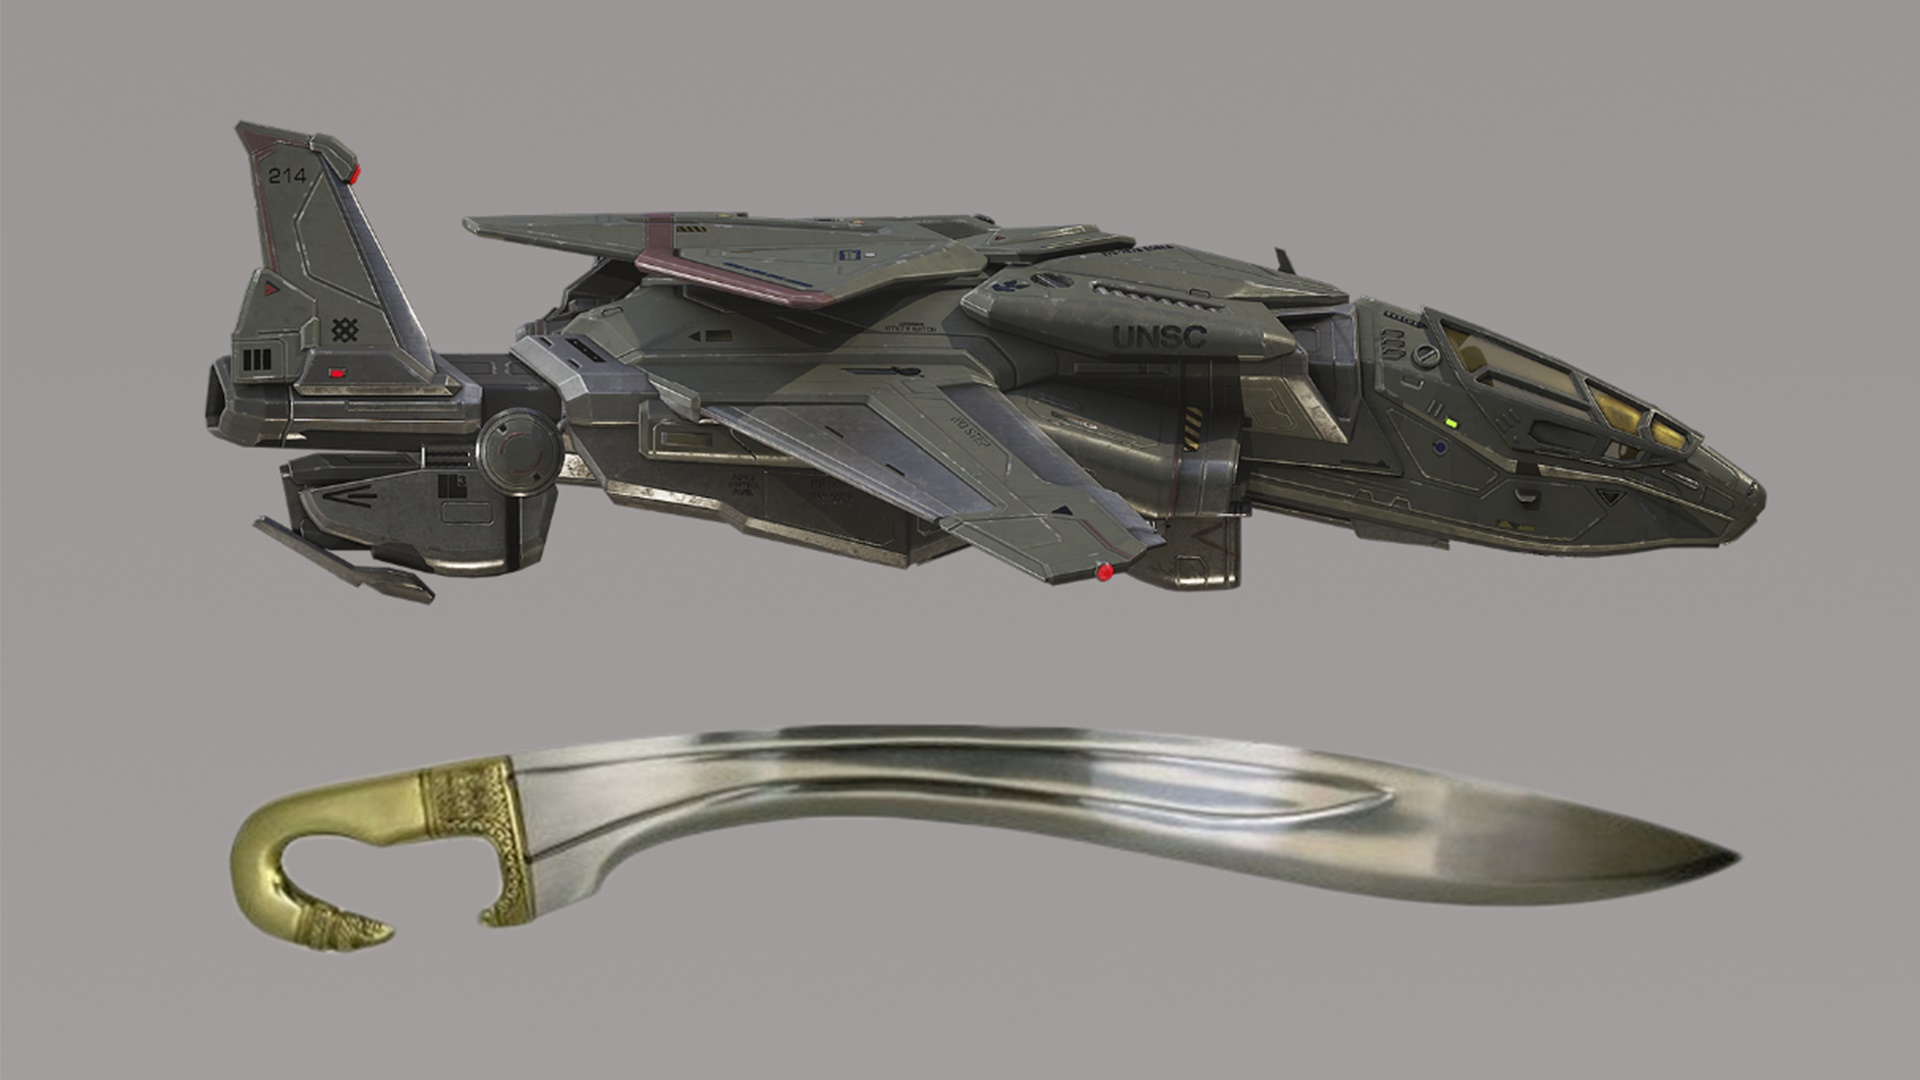 Image depicting the similarity in form of the Falcata fighter and sword